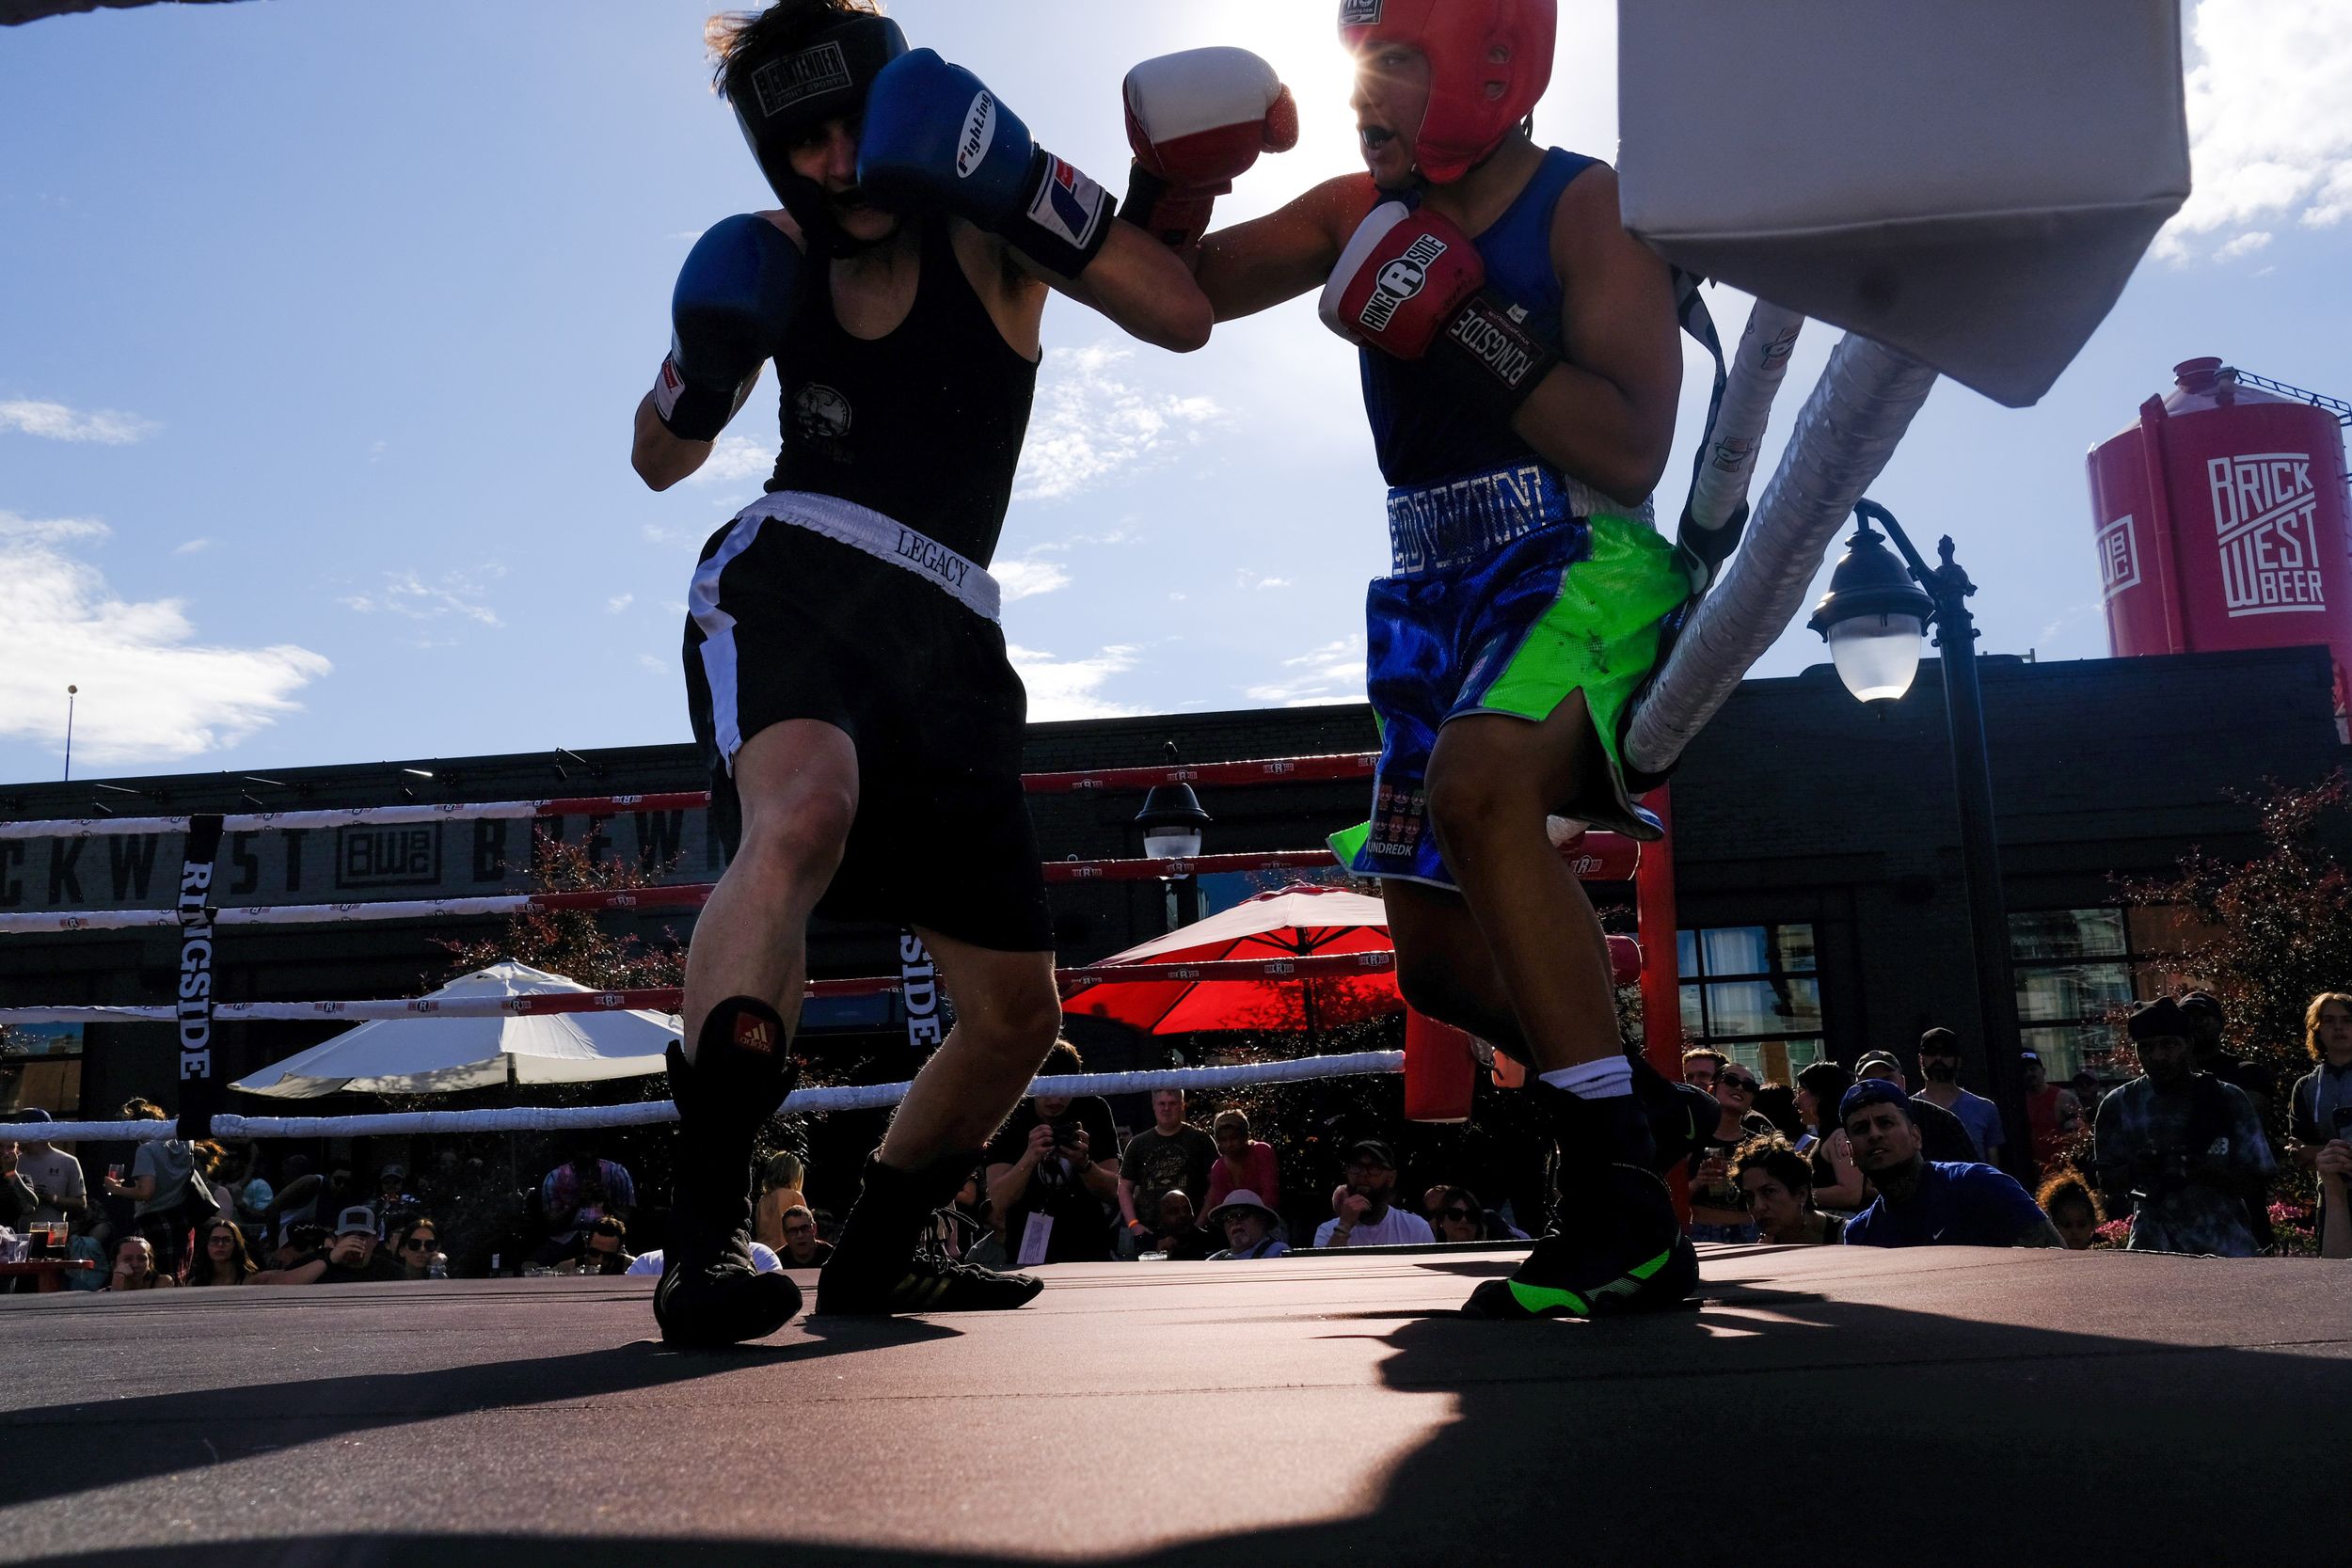 Local food industry workers are getting ready for Spokane's first  Bartenders Brawl boxing match, Food News, Spokane, The Pacific Northwest  Inlander